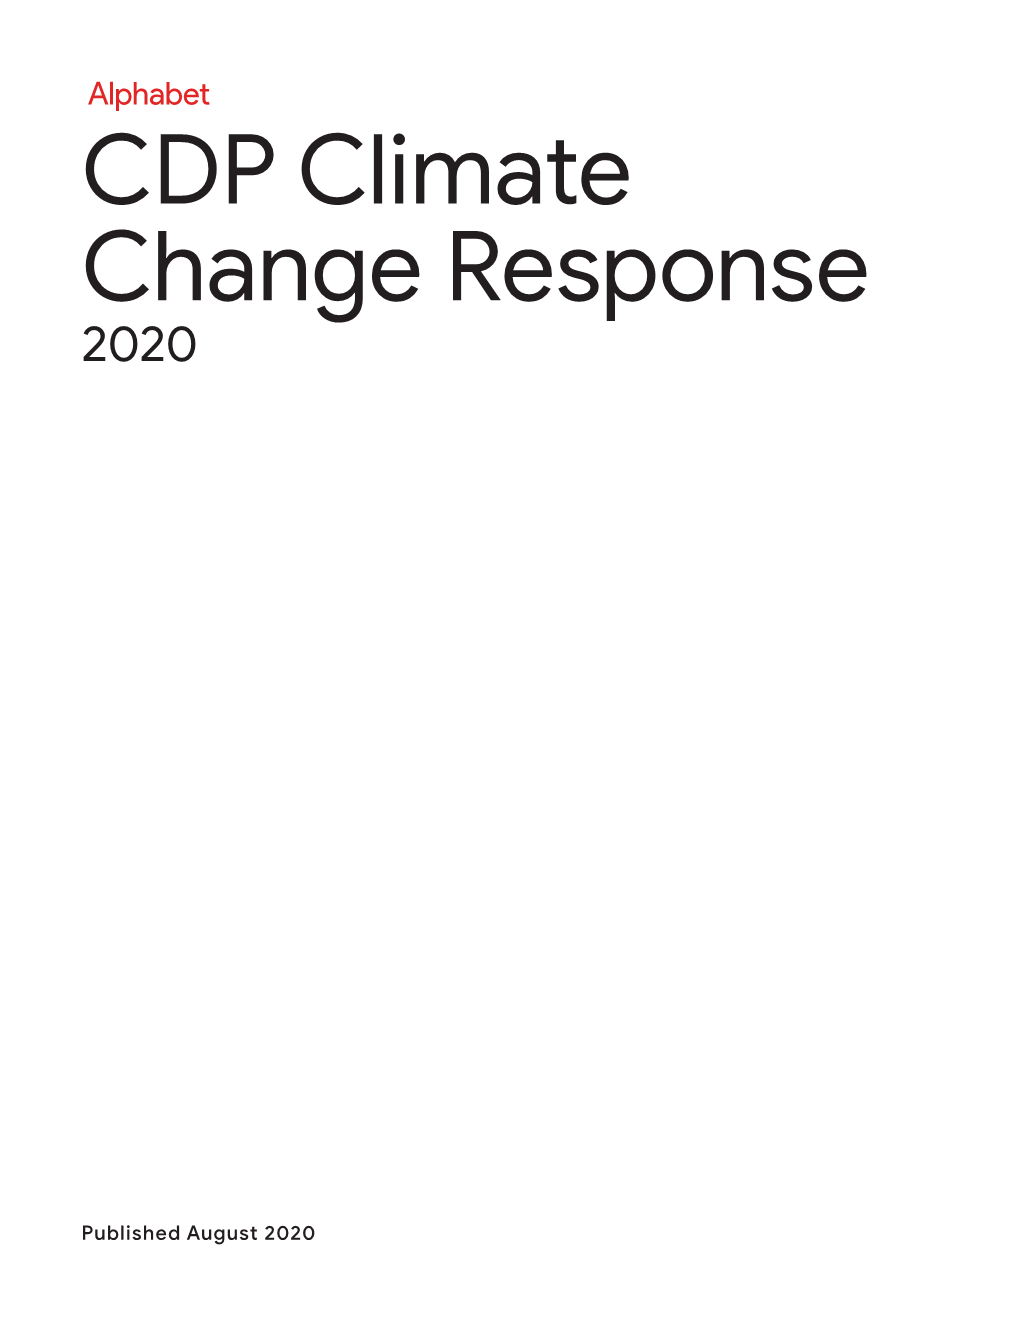 CDP Climate Change Response 2020